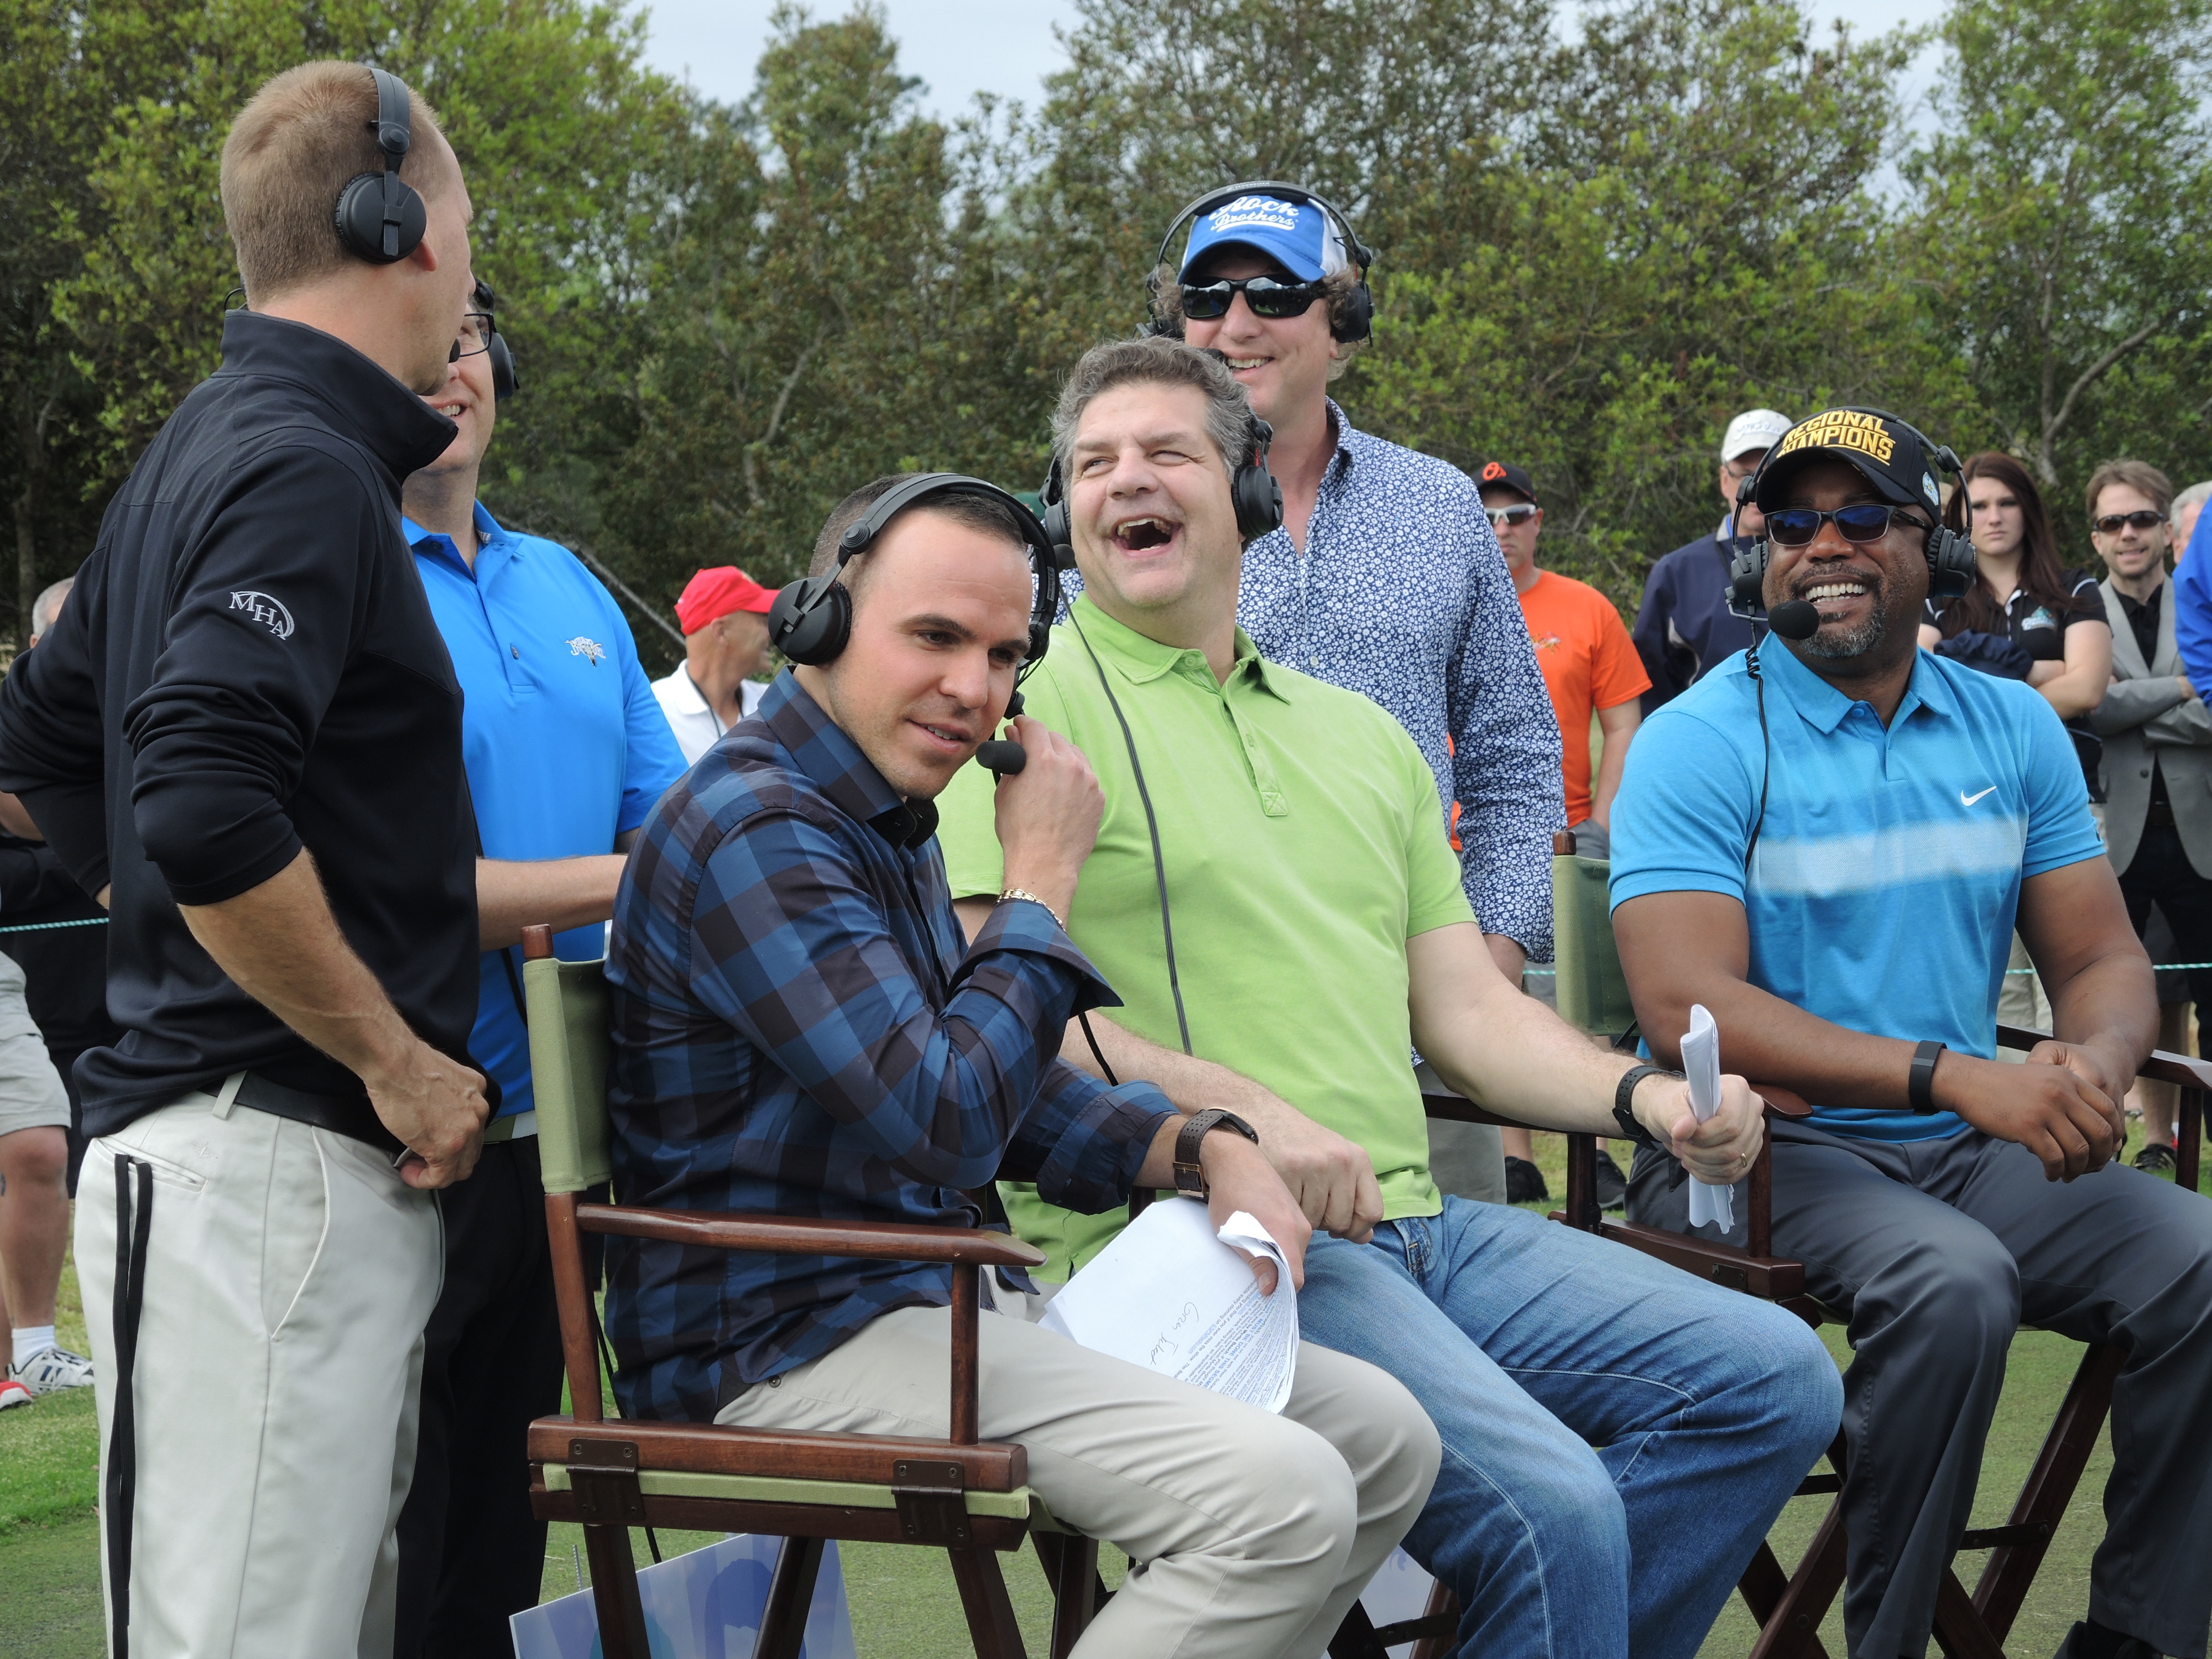 This was one of my favorite photos I took today. Golic and Ruocco interview Darius Rucker and his band.